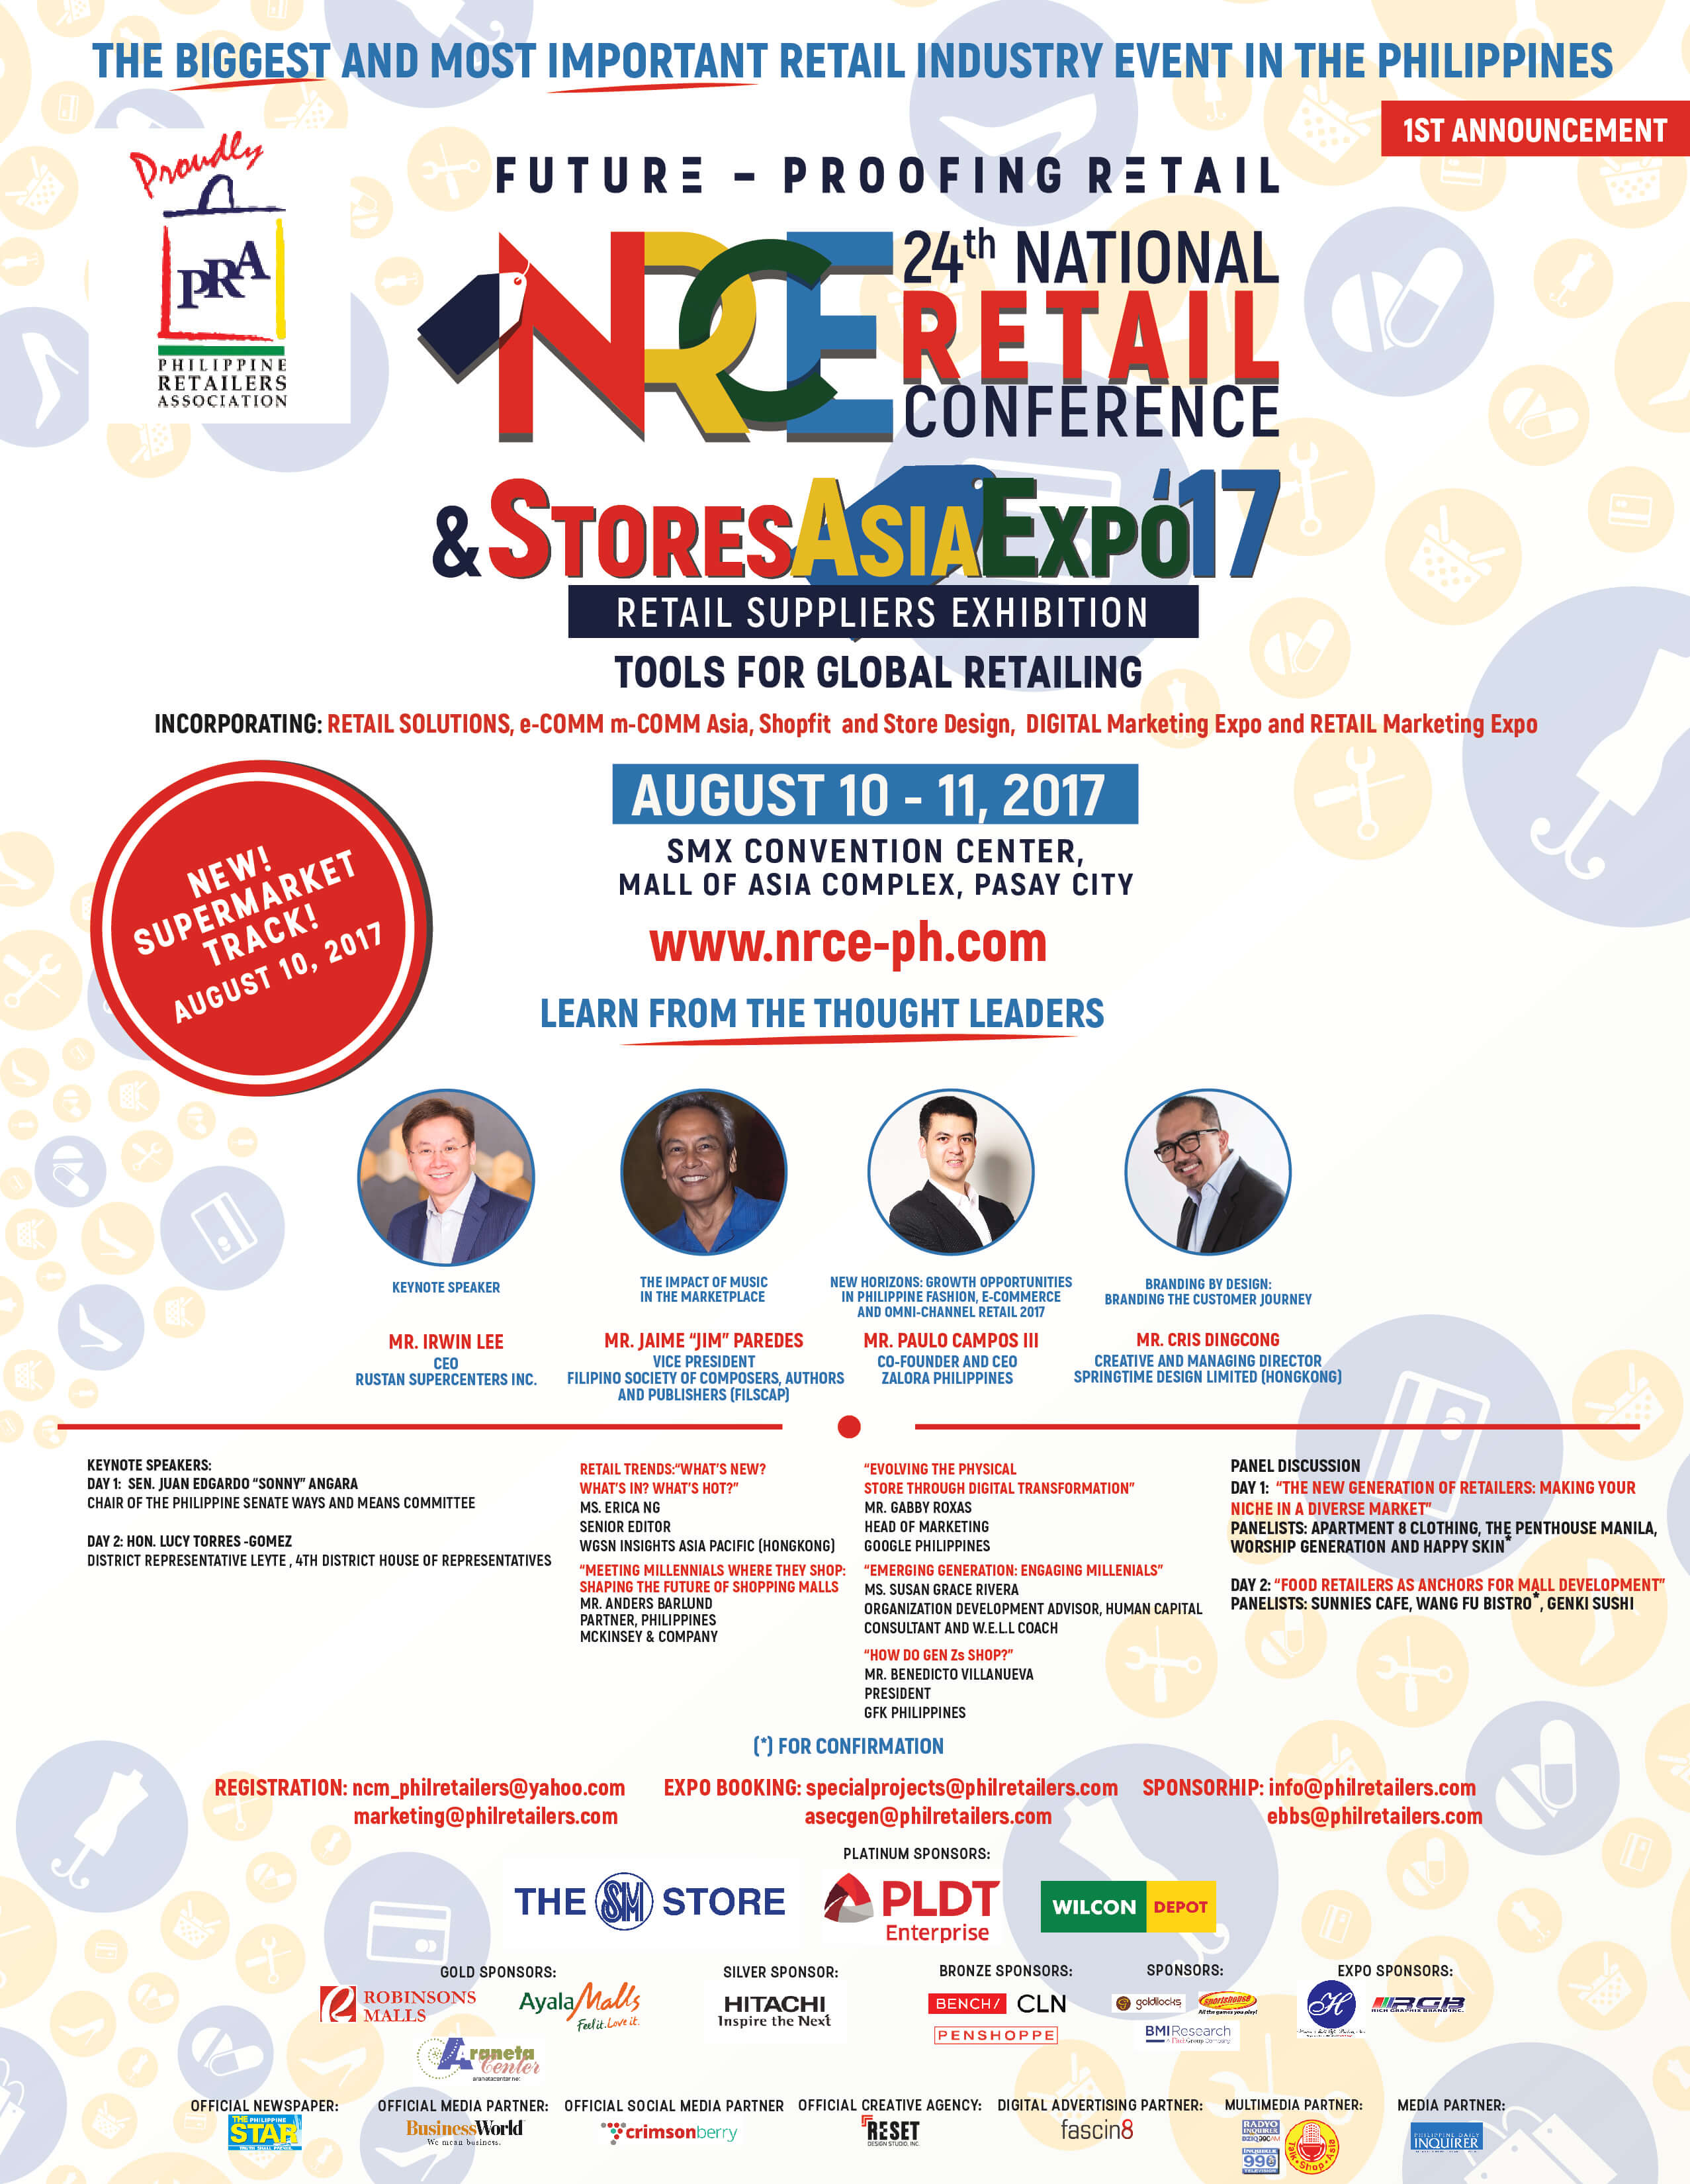 24th National Retail Conference and Stores Asia Expo